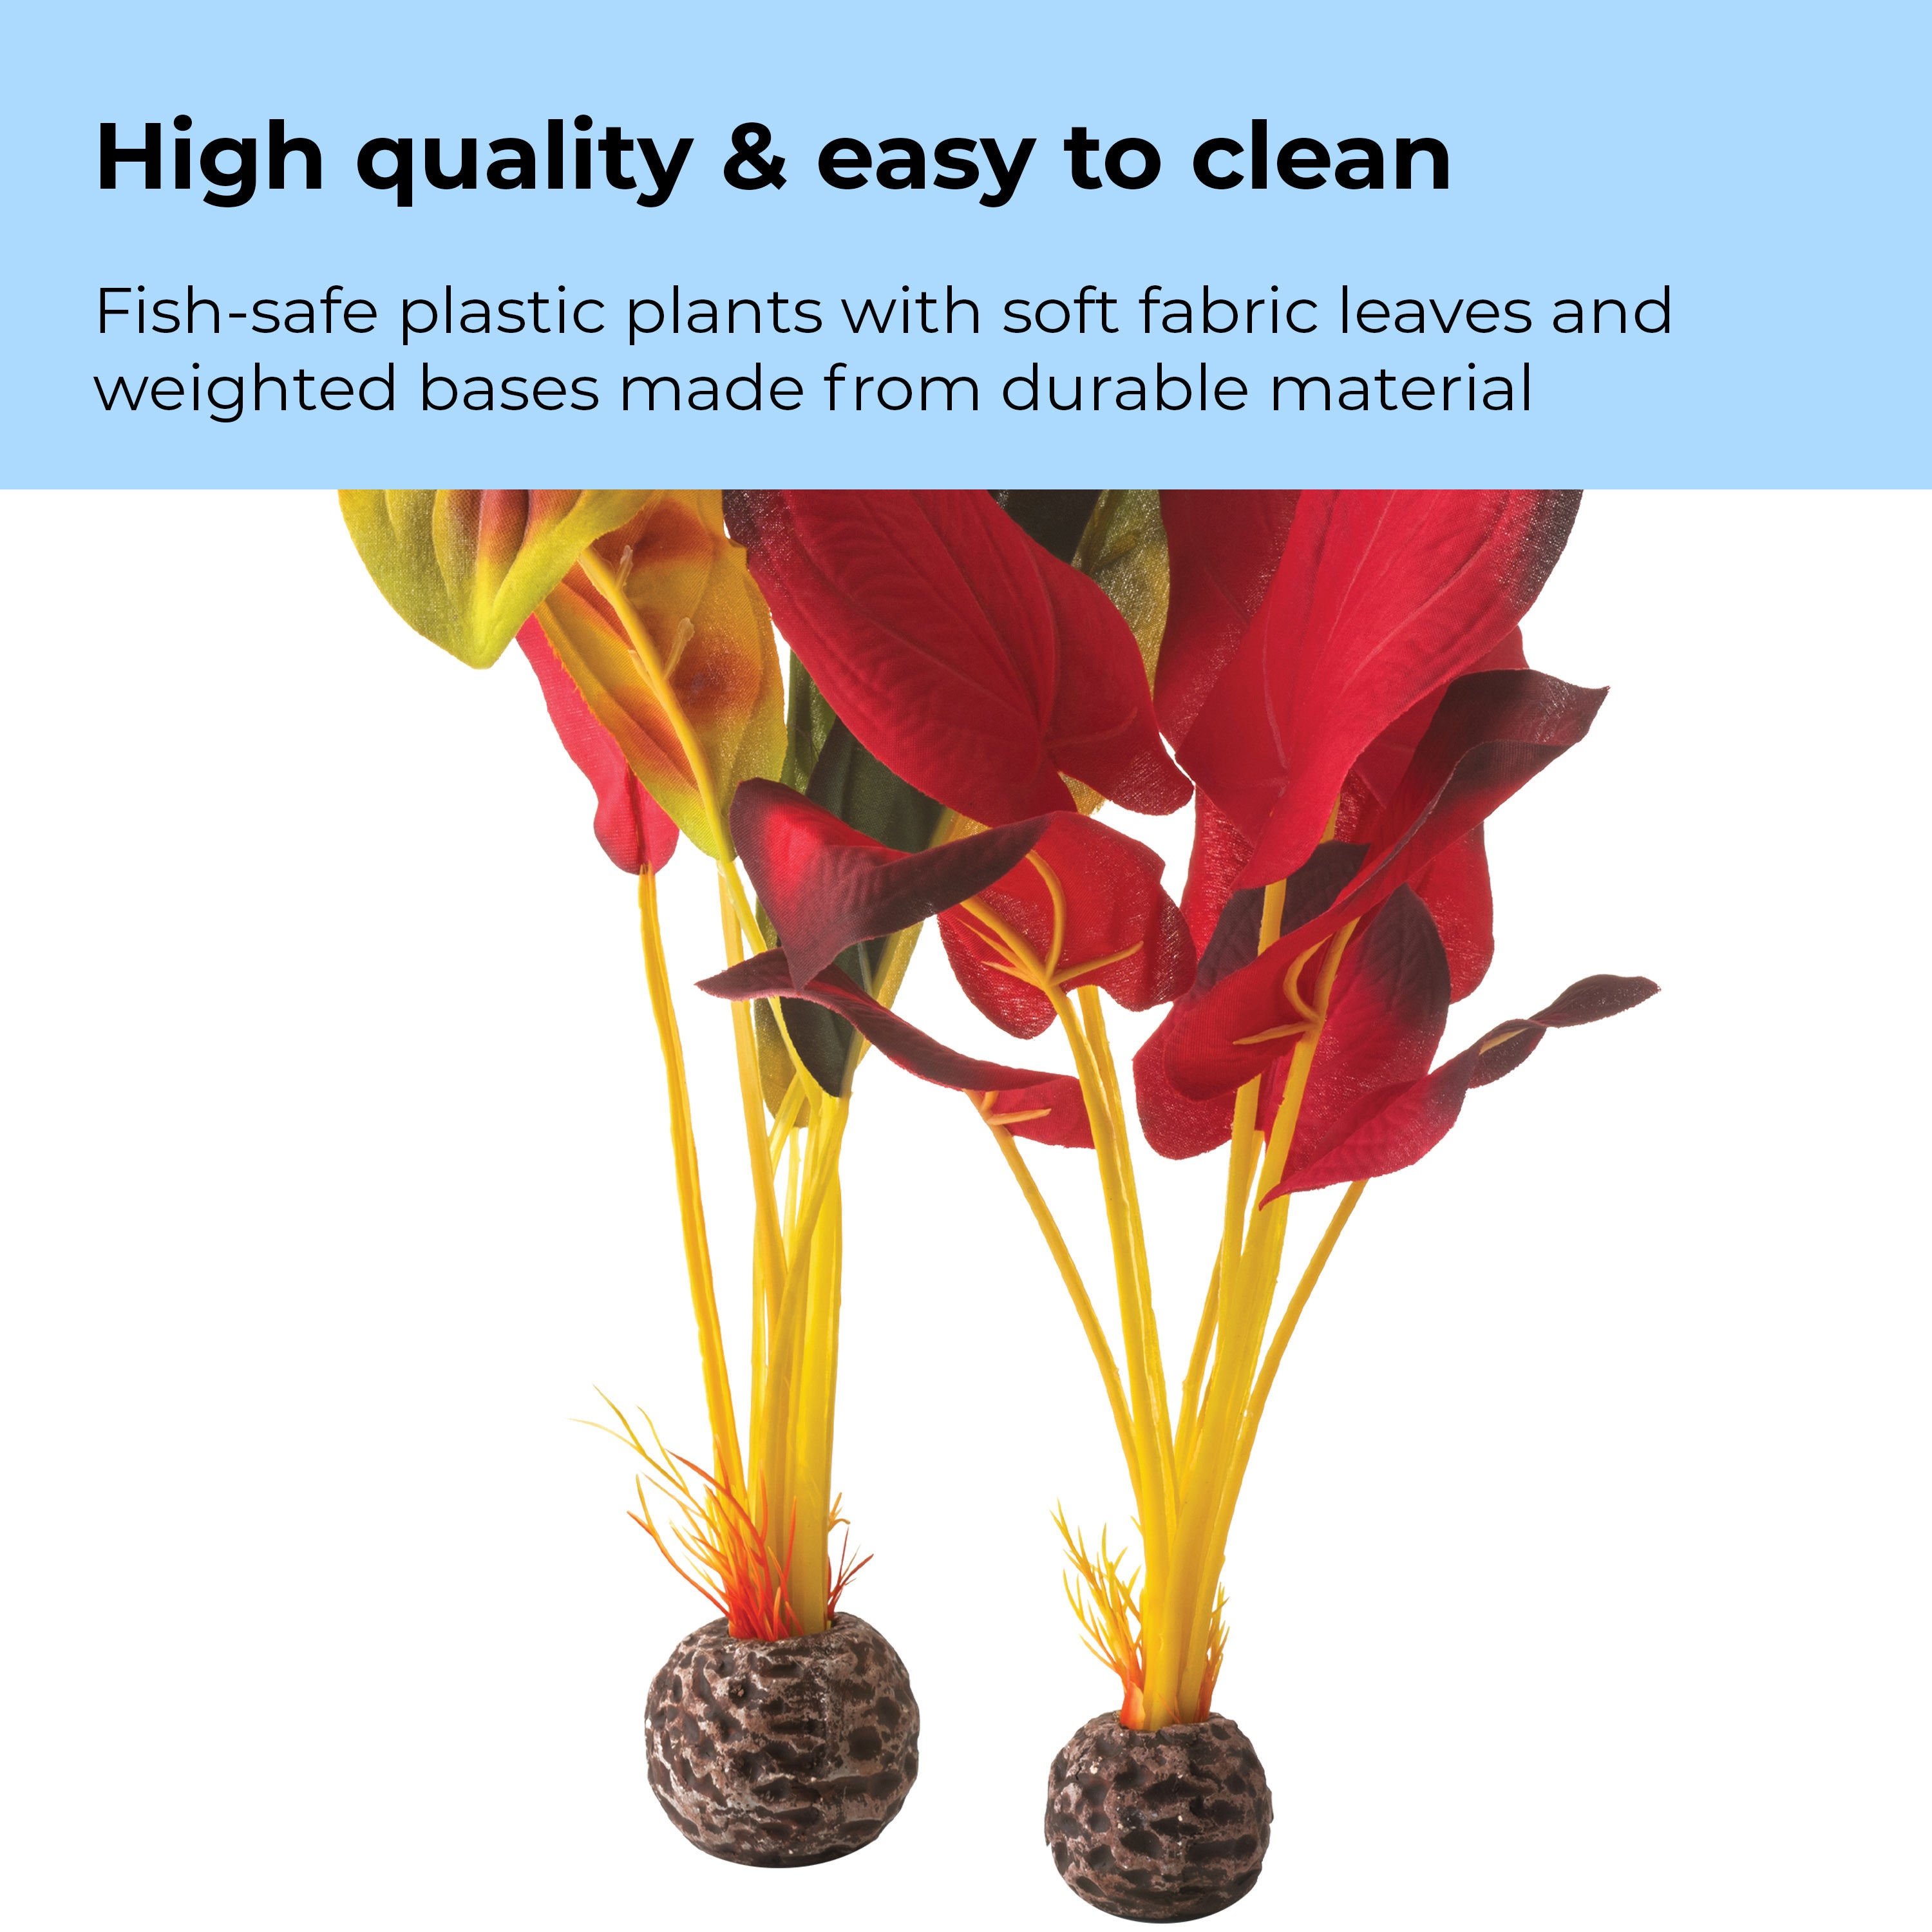 Green & Red Silk Plant Set, large - High quality & easy to clean